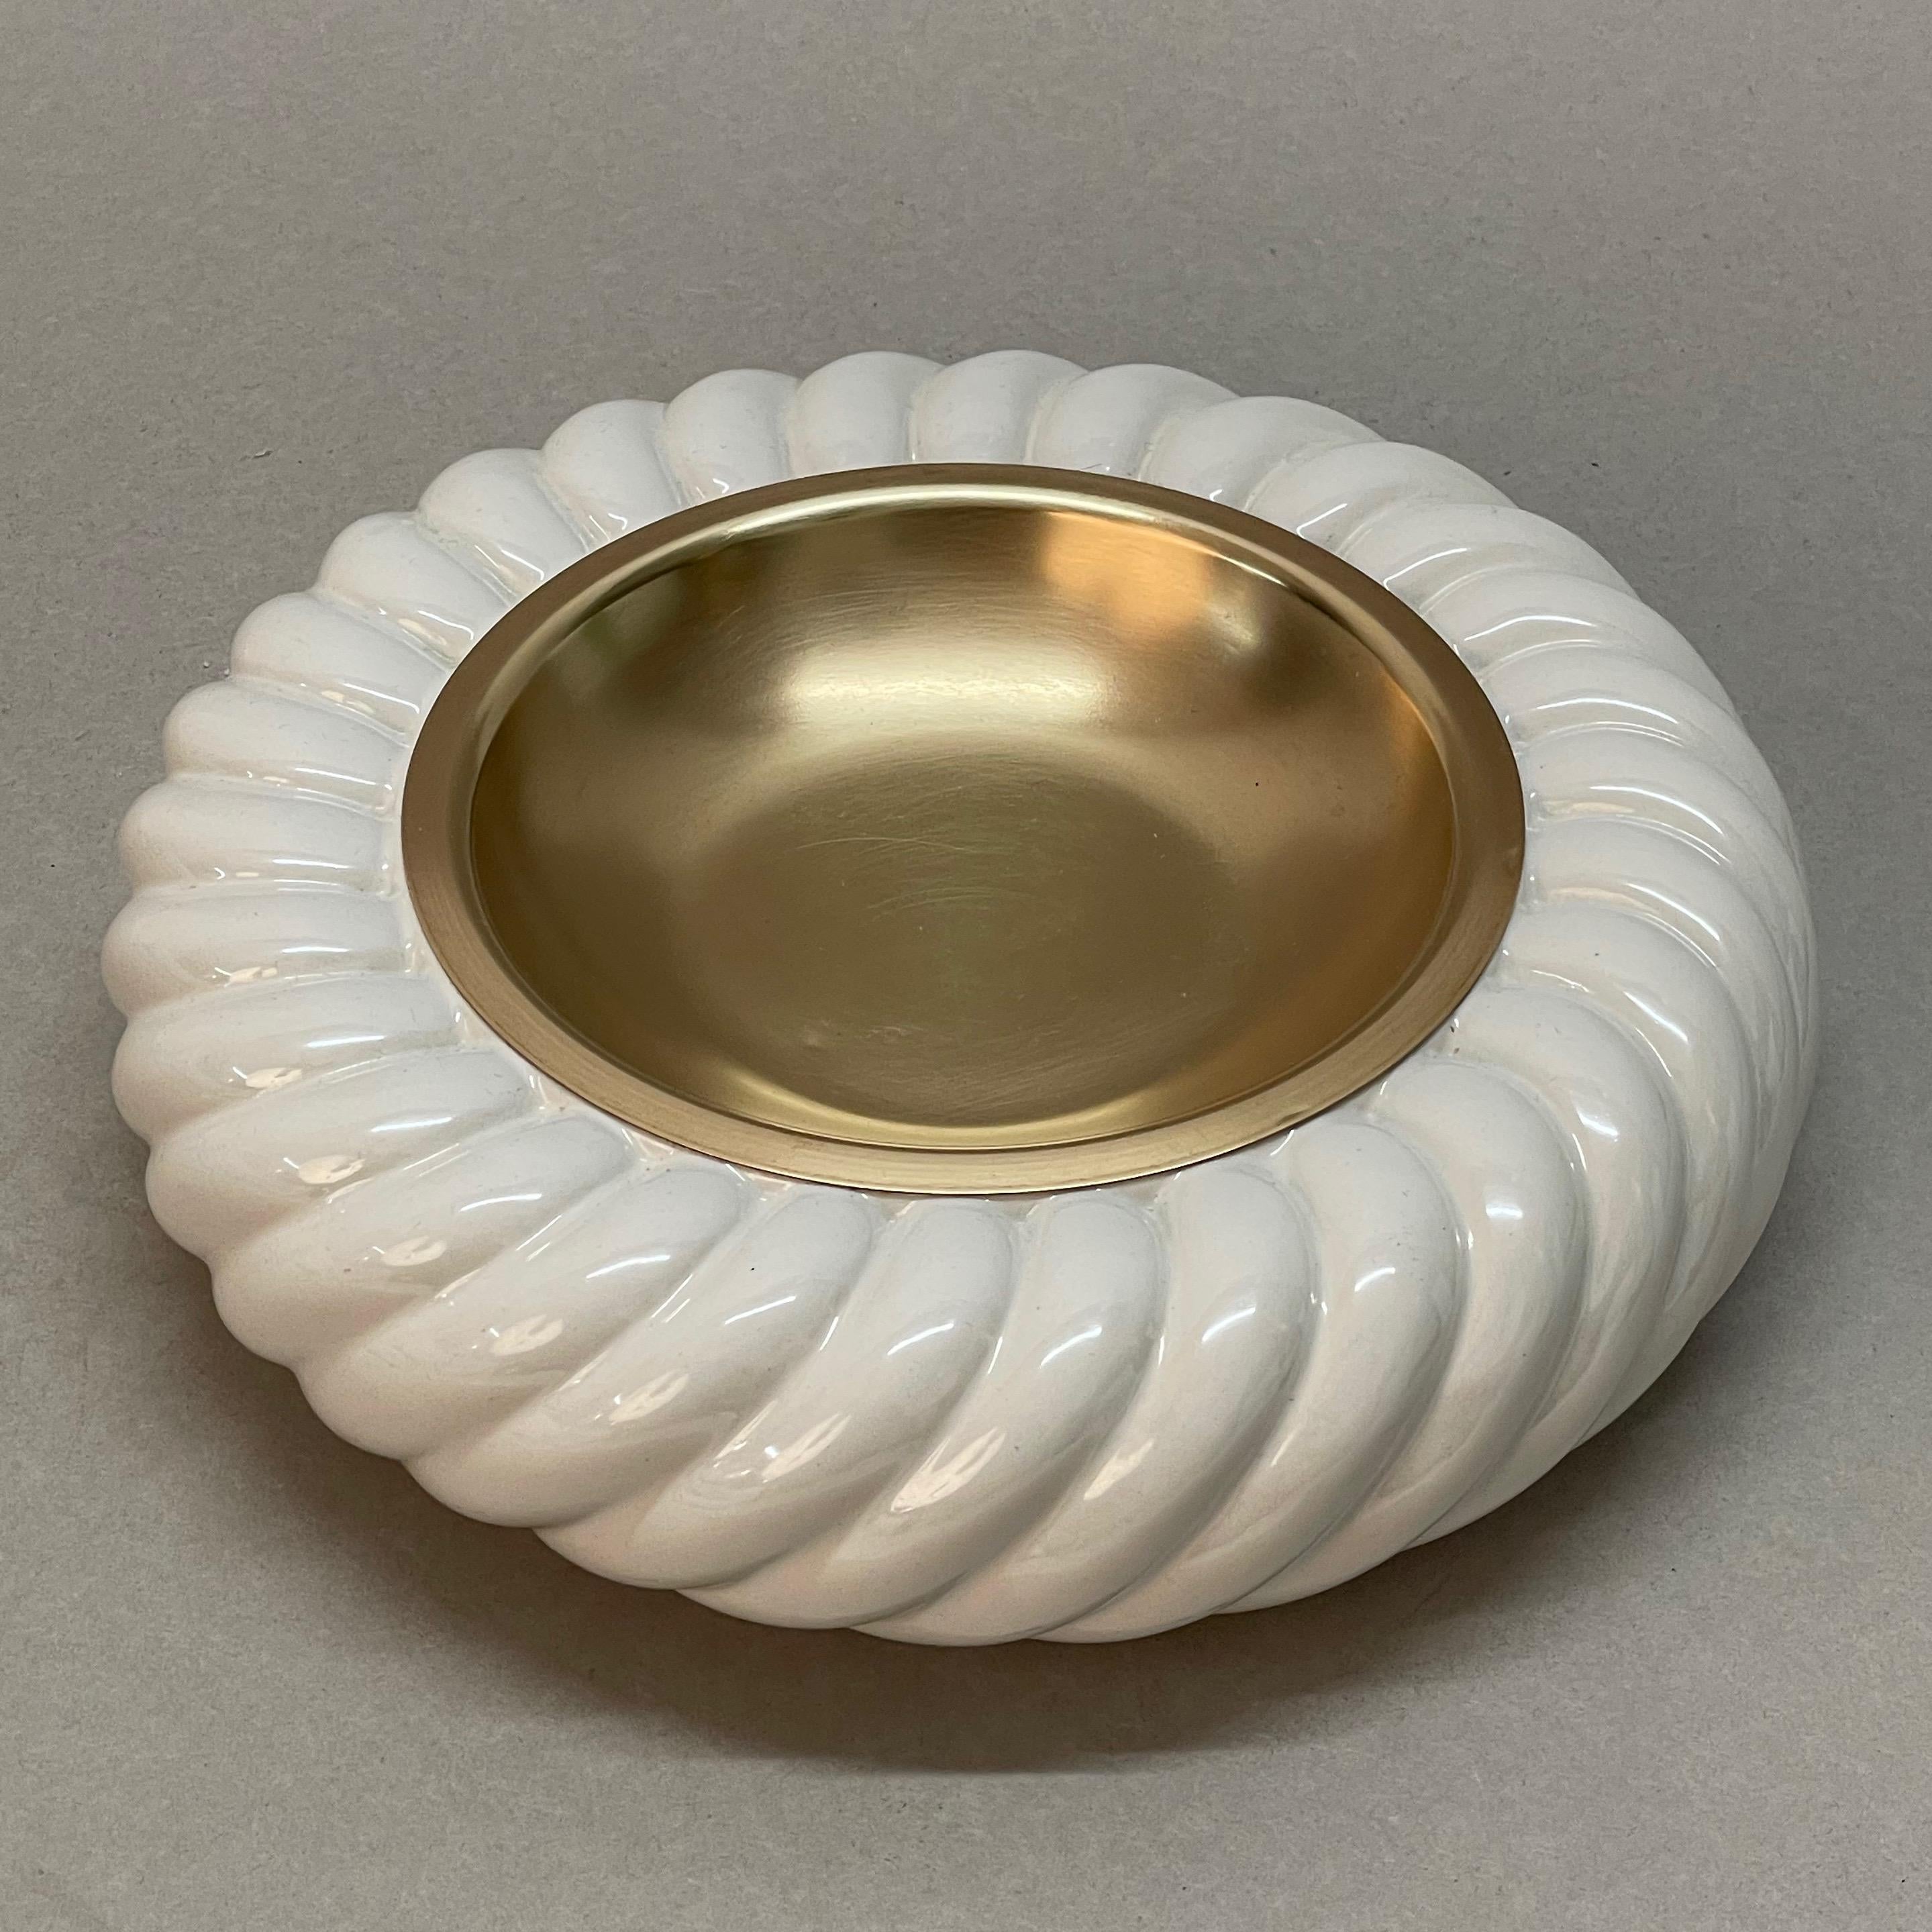 Incredible pair of Mid-Century Modern white ceramic and brass ashtrays. These fantastic pieces were designed by Tommaso Barbi and produced by B. Ceramiche in the late 1960s in Italy.

The manufacturer's brand stamp is at the bottom of the items